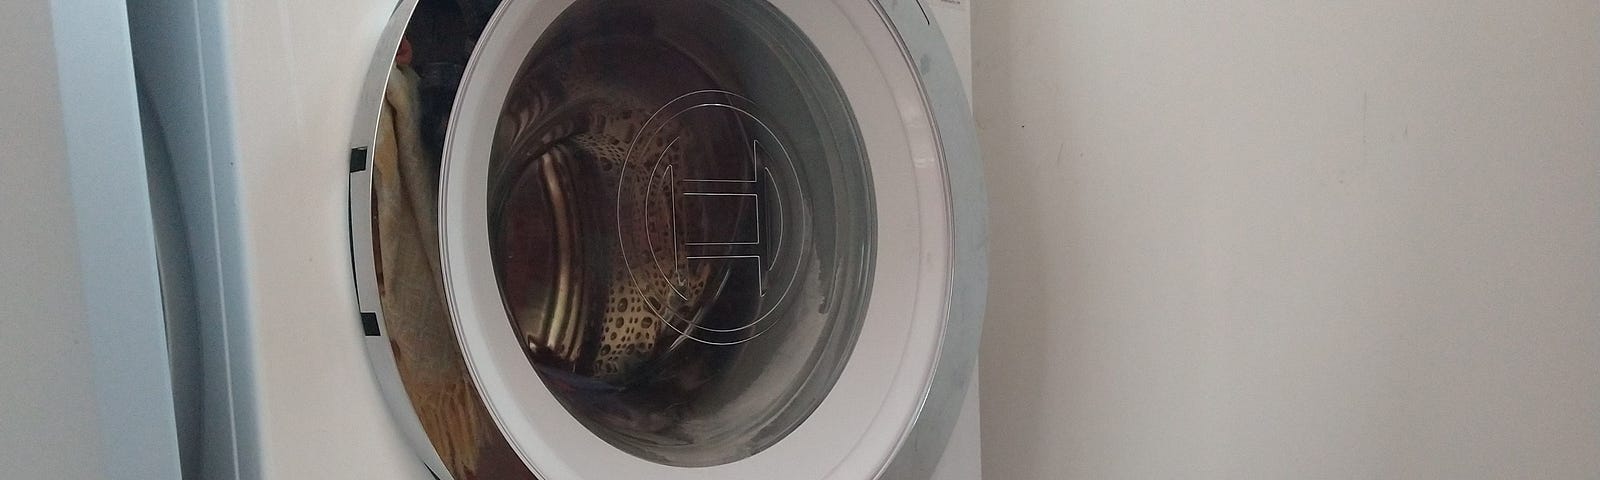 A photograph of our Bosch Washing machine, wet towel on the floor, oven tray on top of it to catch the water as it was drained.